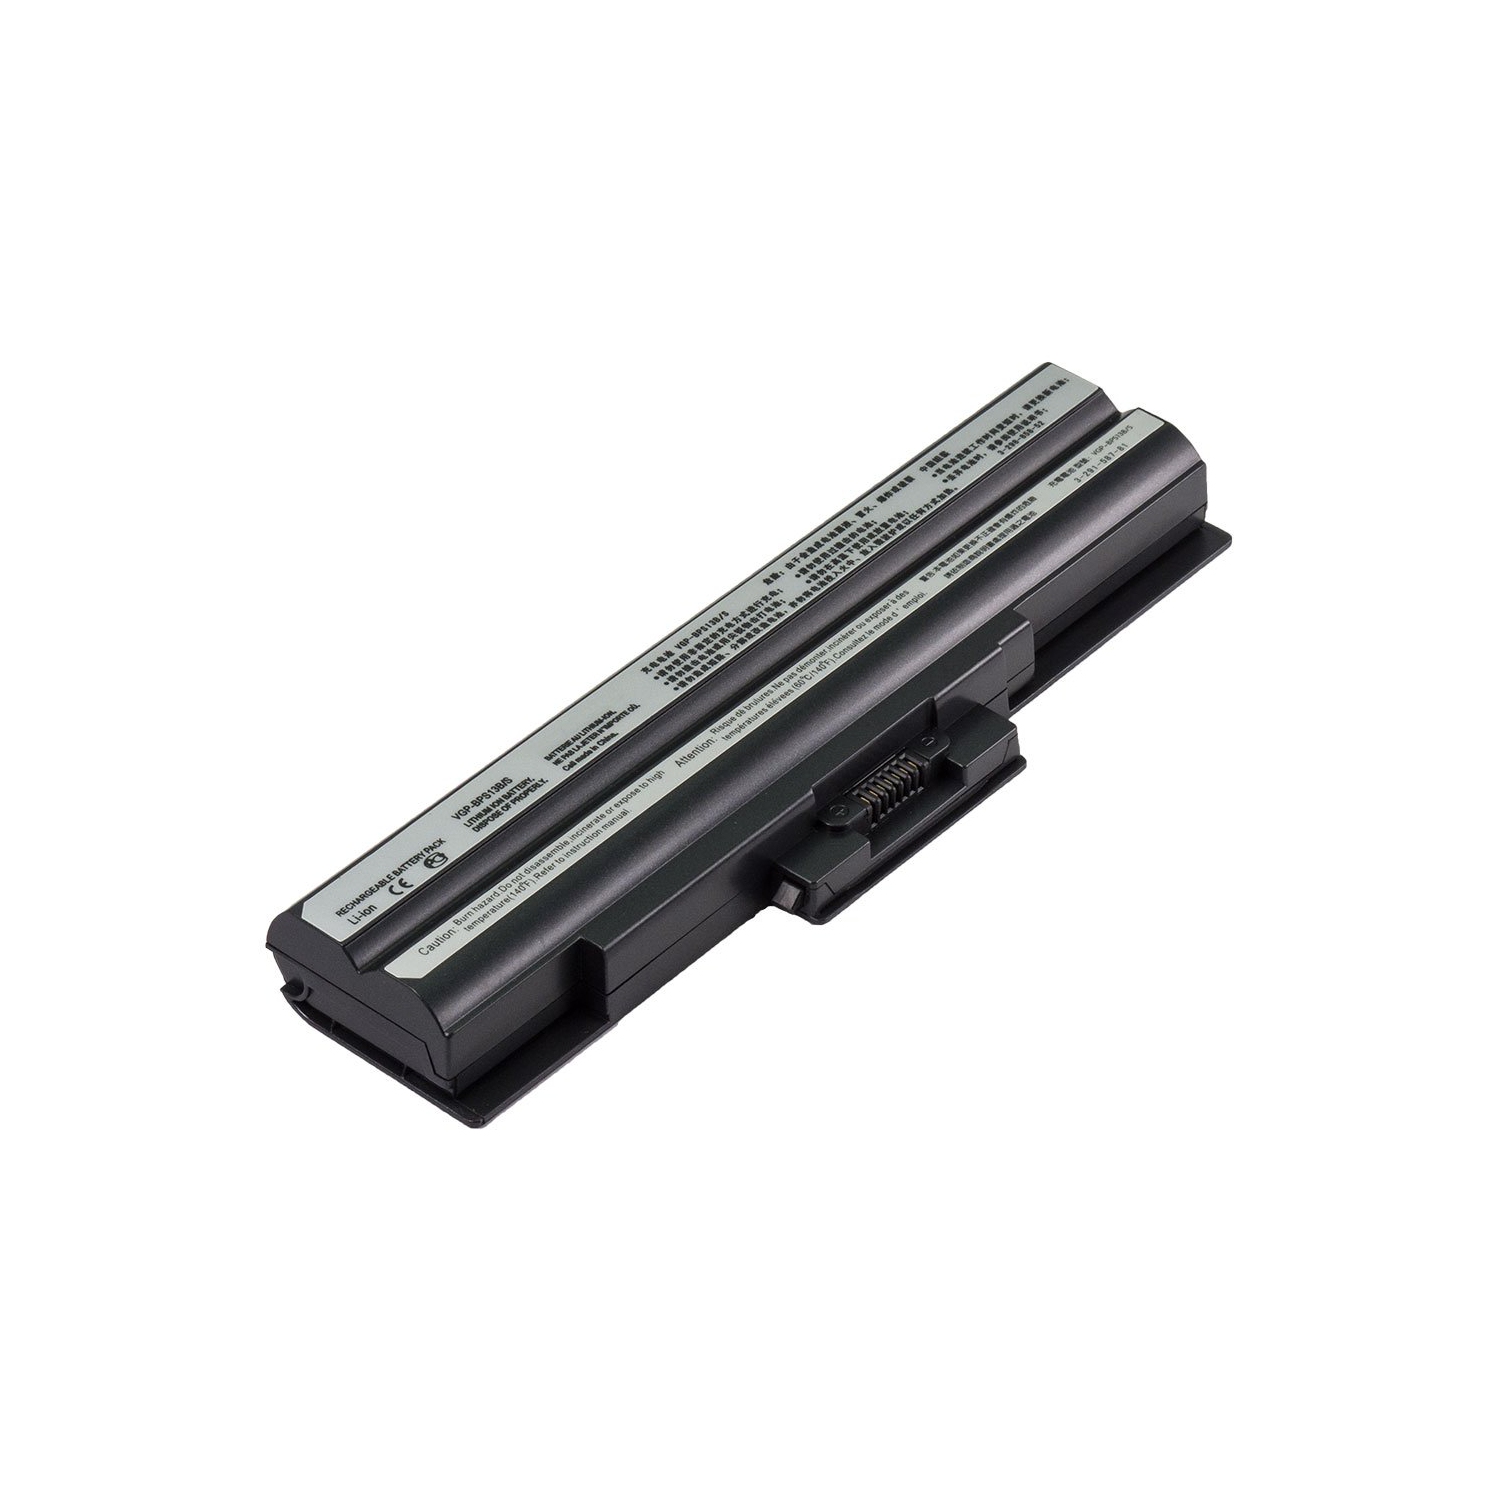 Laptop Battery Replacement for Sony VAIO VGN-FW590GMB, VGP-BPL13, VGP-BPS13/Q, VGP-BPS13A/B, VGP-BPS13A/S, VGP-BPS13A